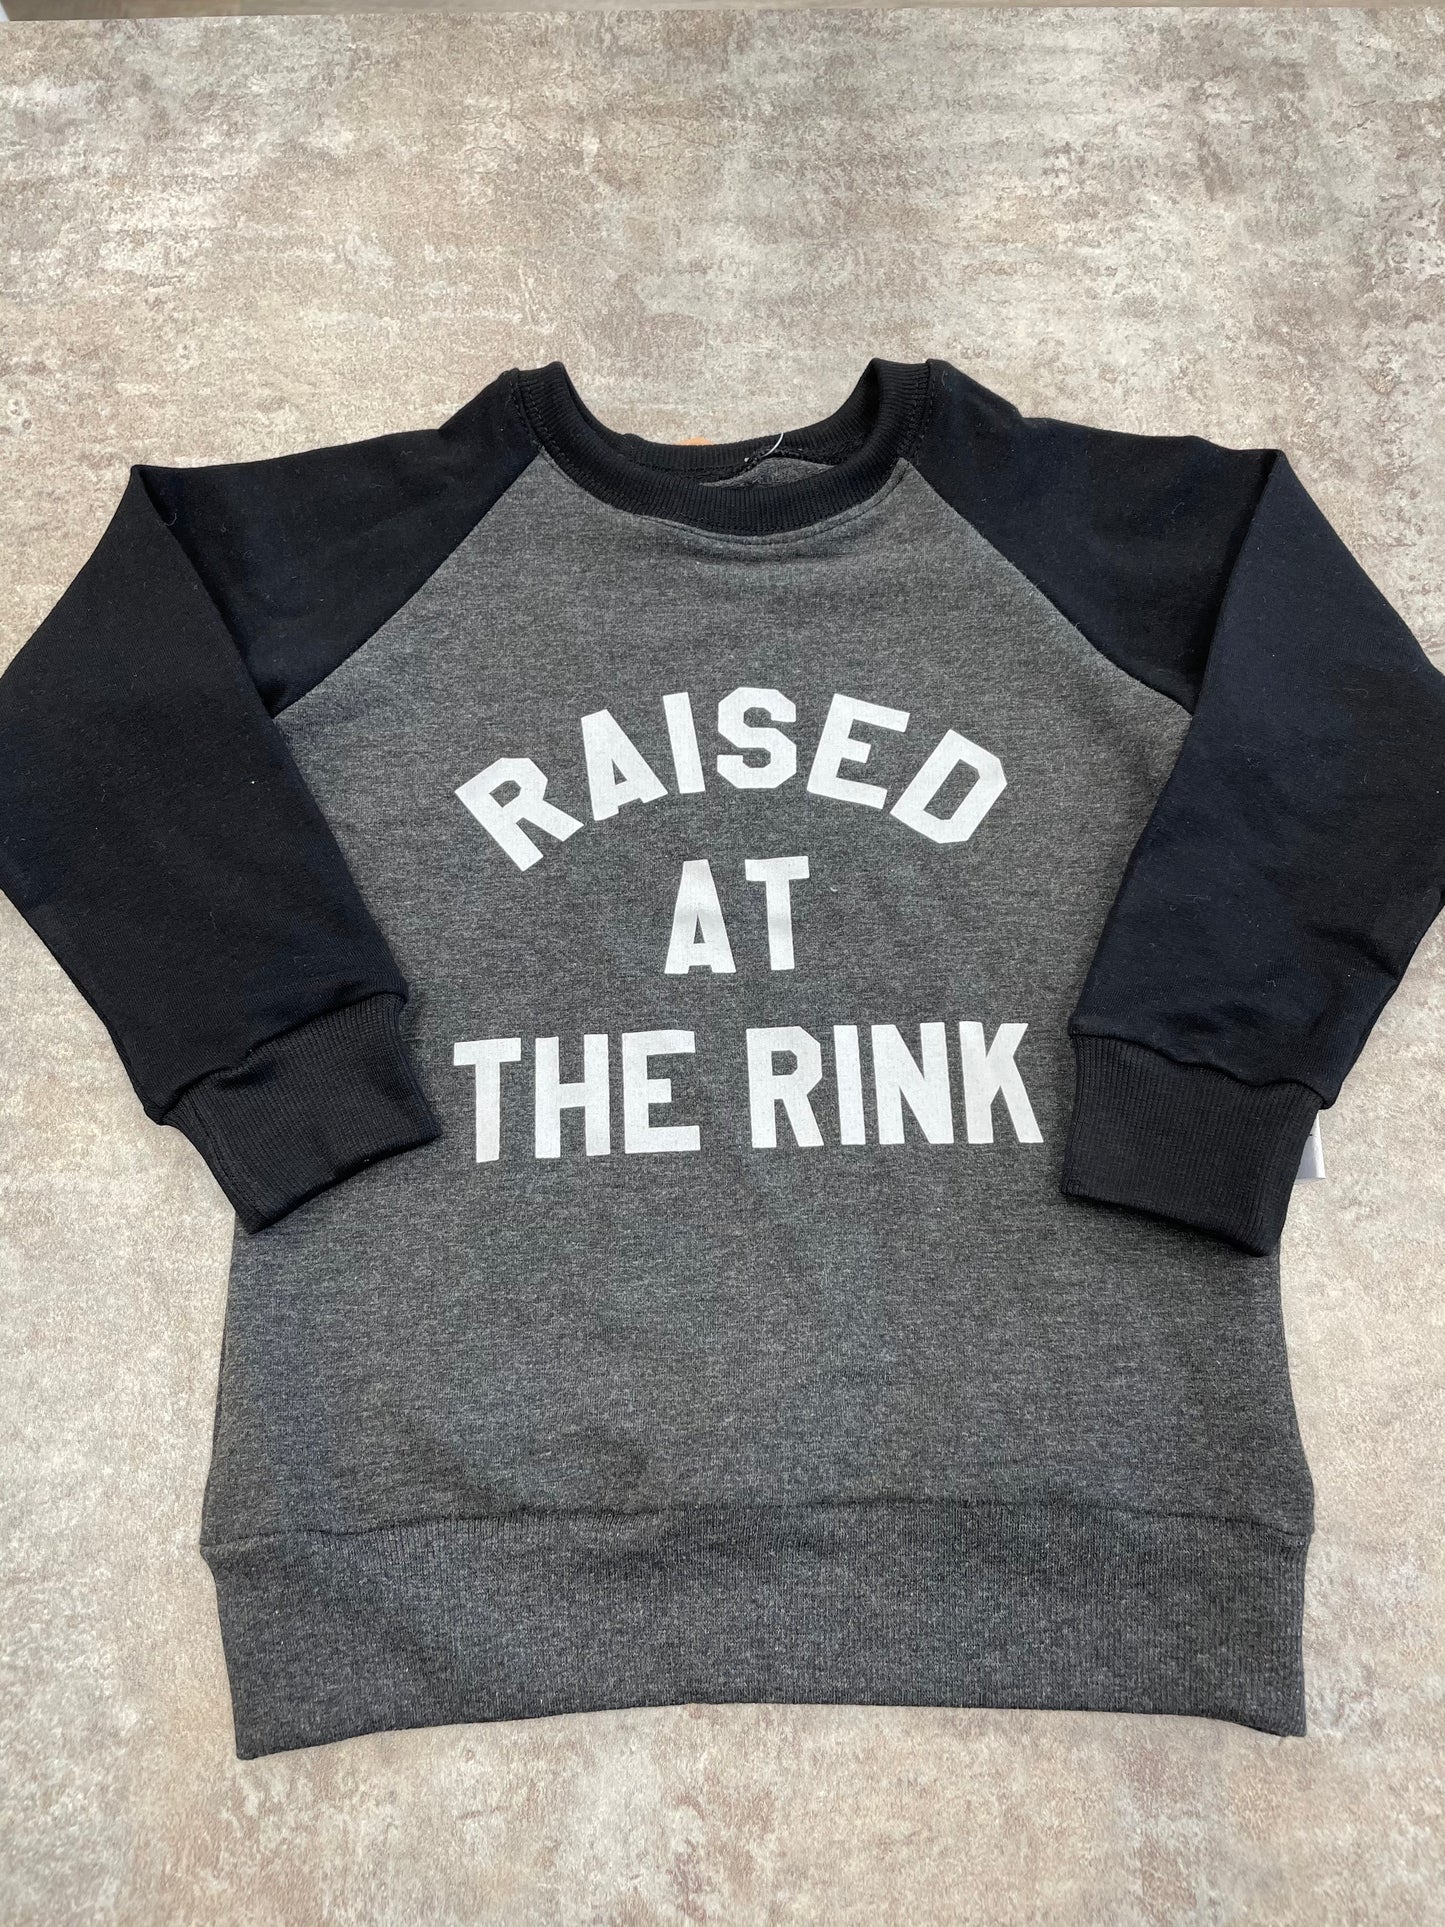 PAM-33 Raised at the Rink Toddler